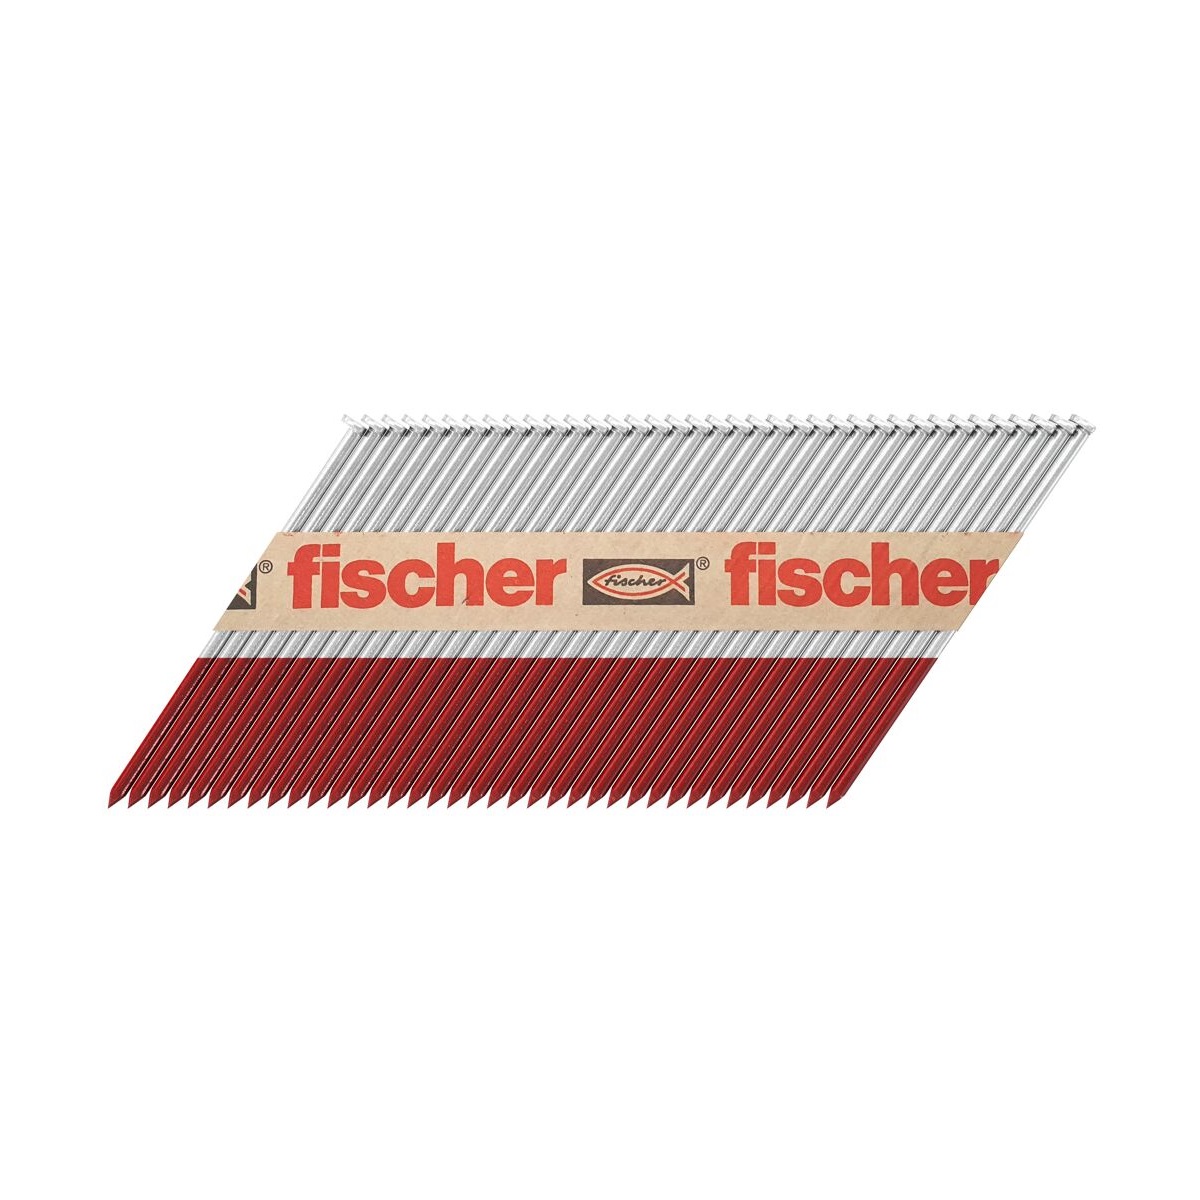 Fischer FF NFP 90x3.1mm Smooth Galv 2200 N.G